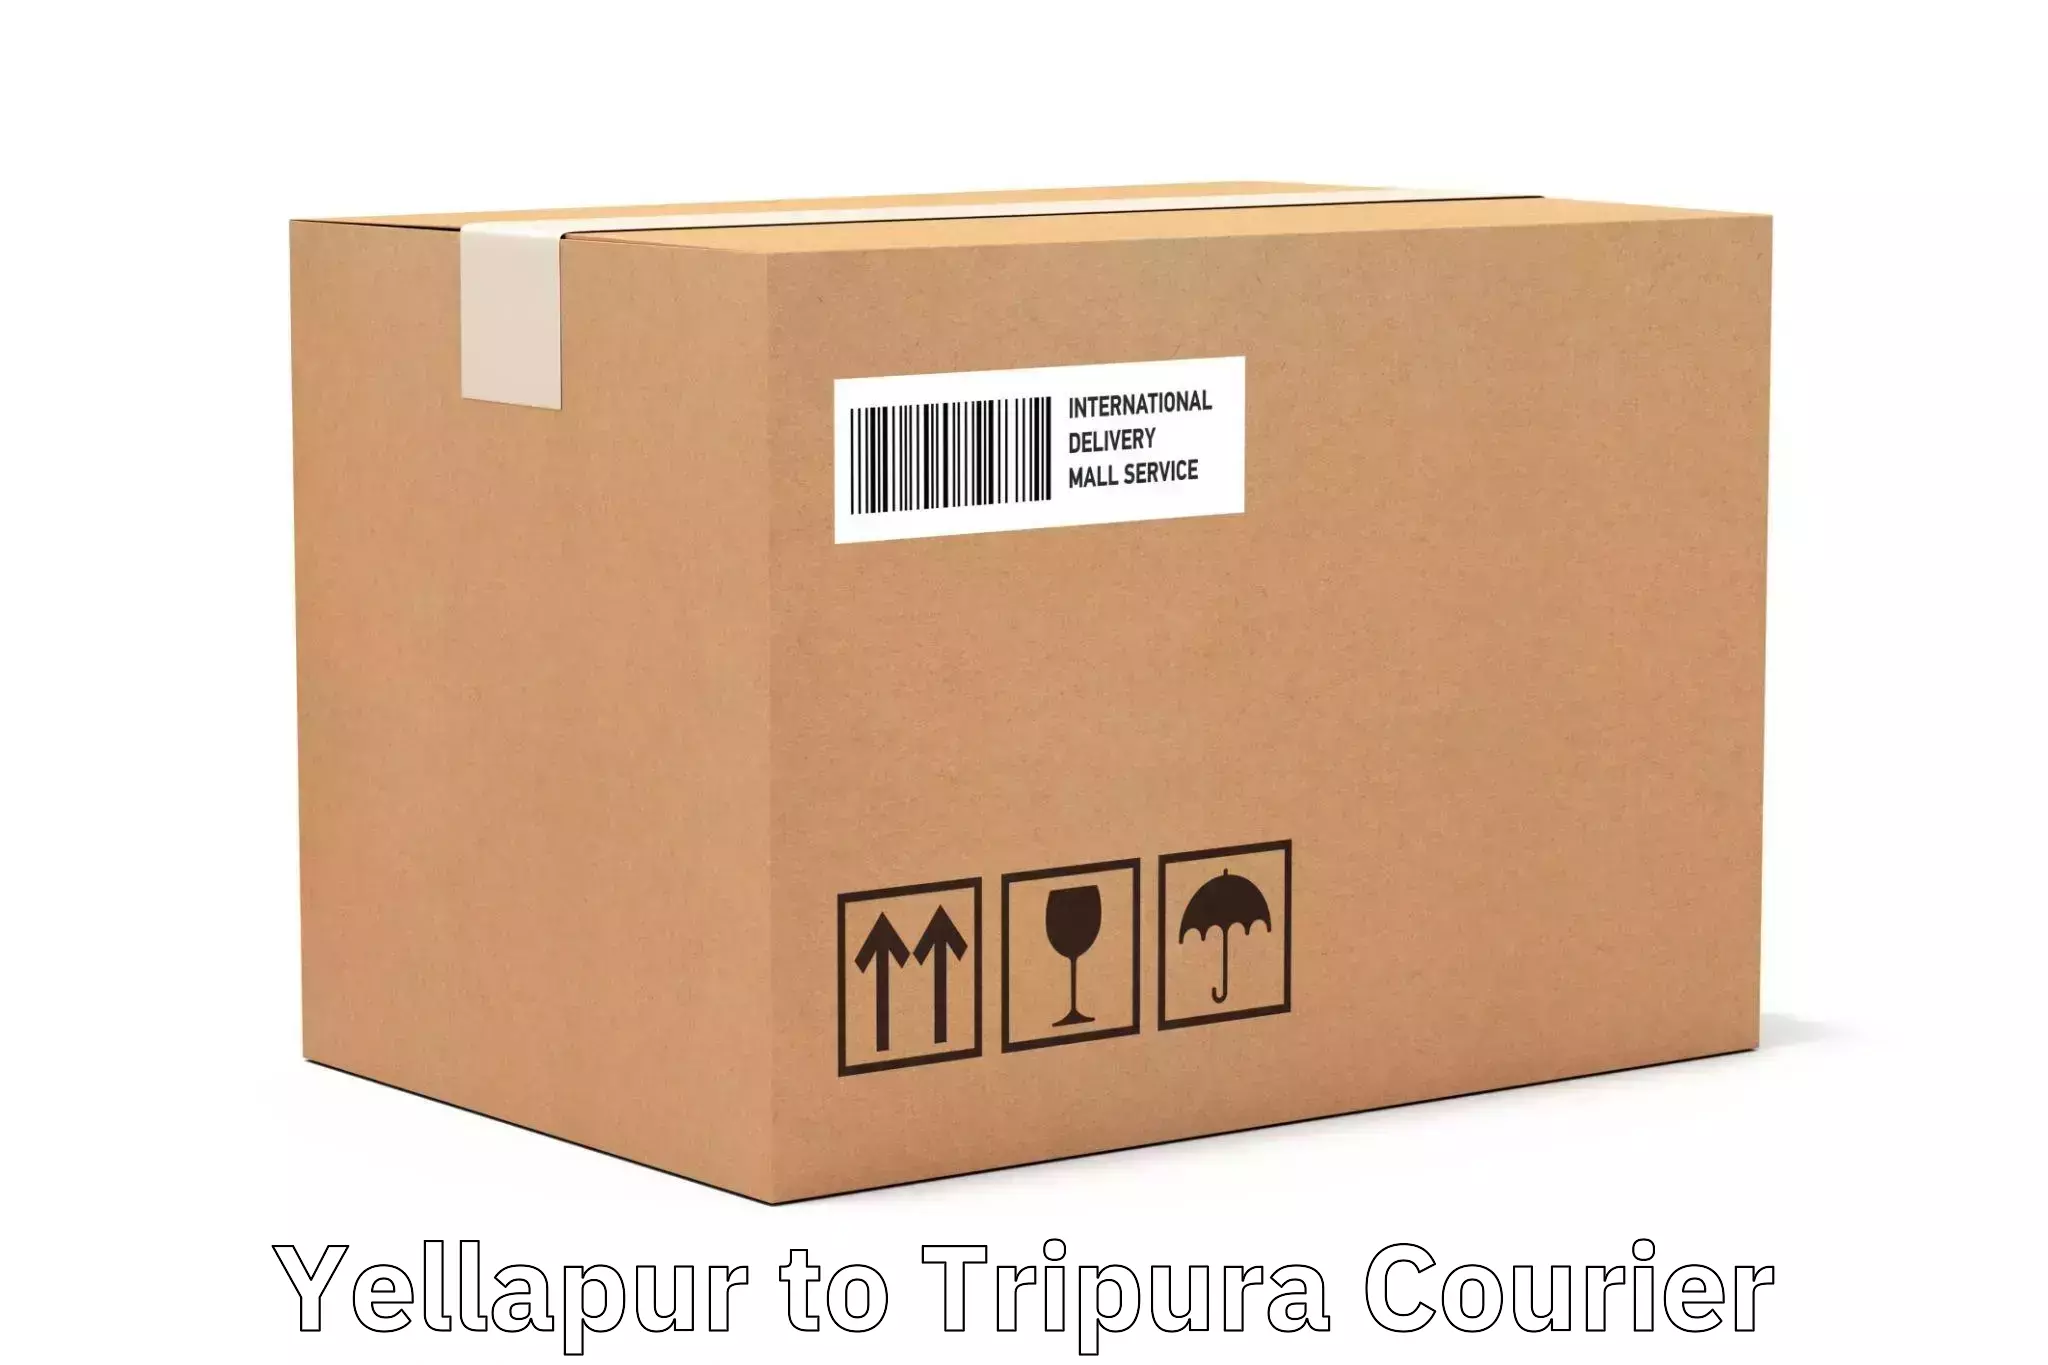 Large-scale shipping solutions Yellapur to Udaipur Tripura